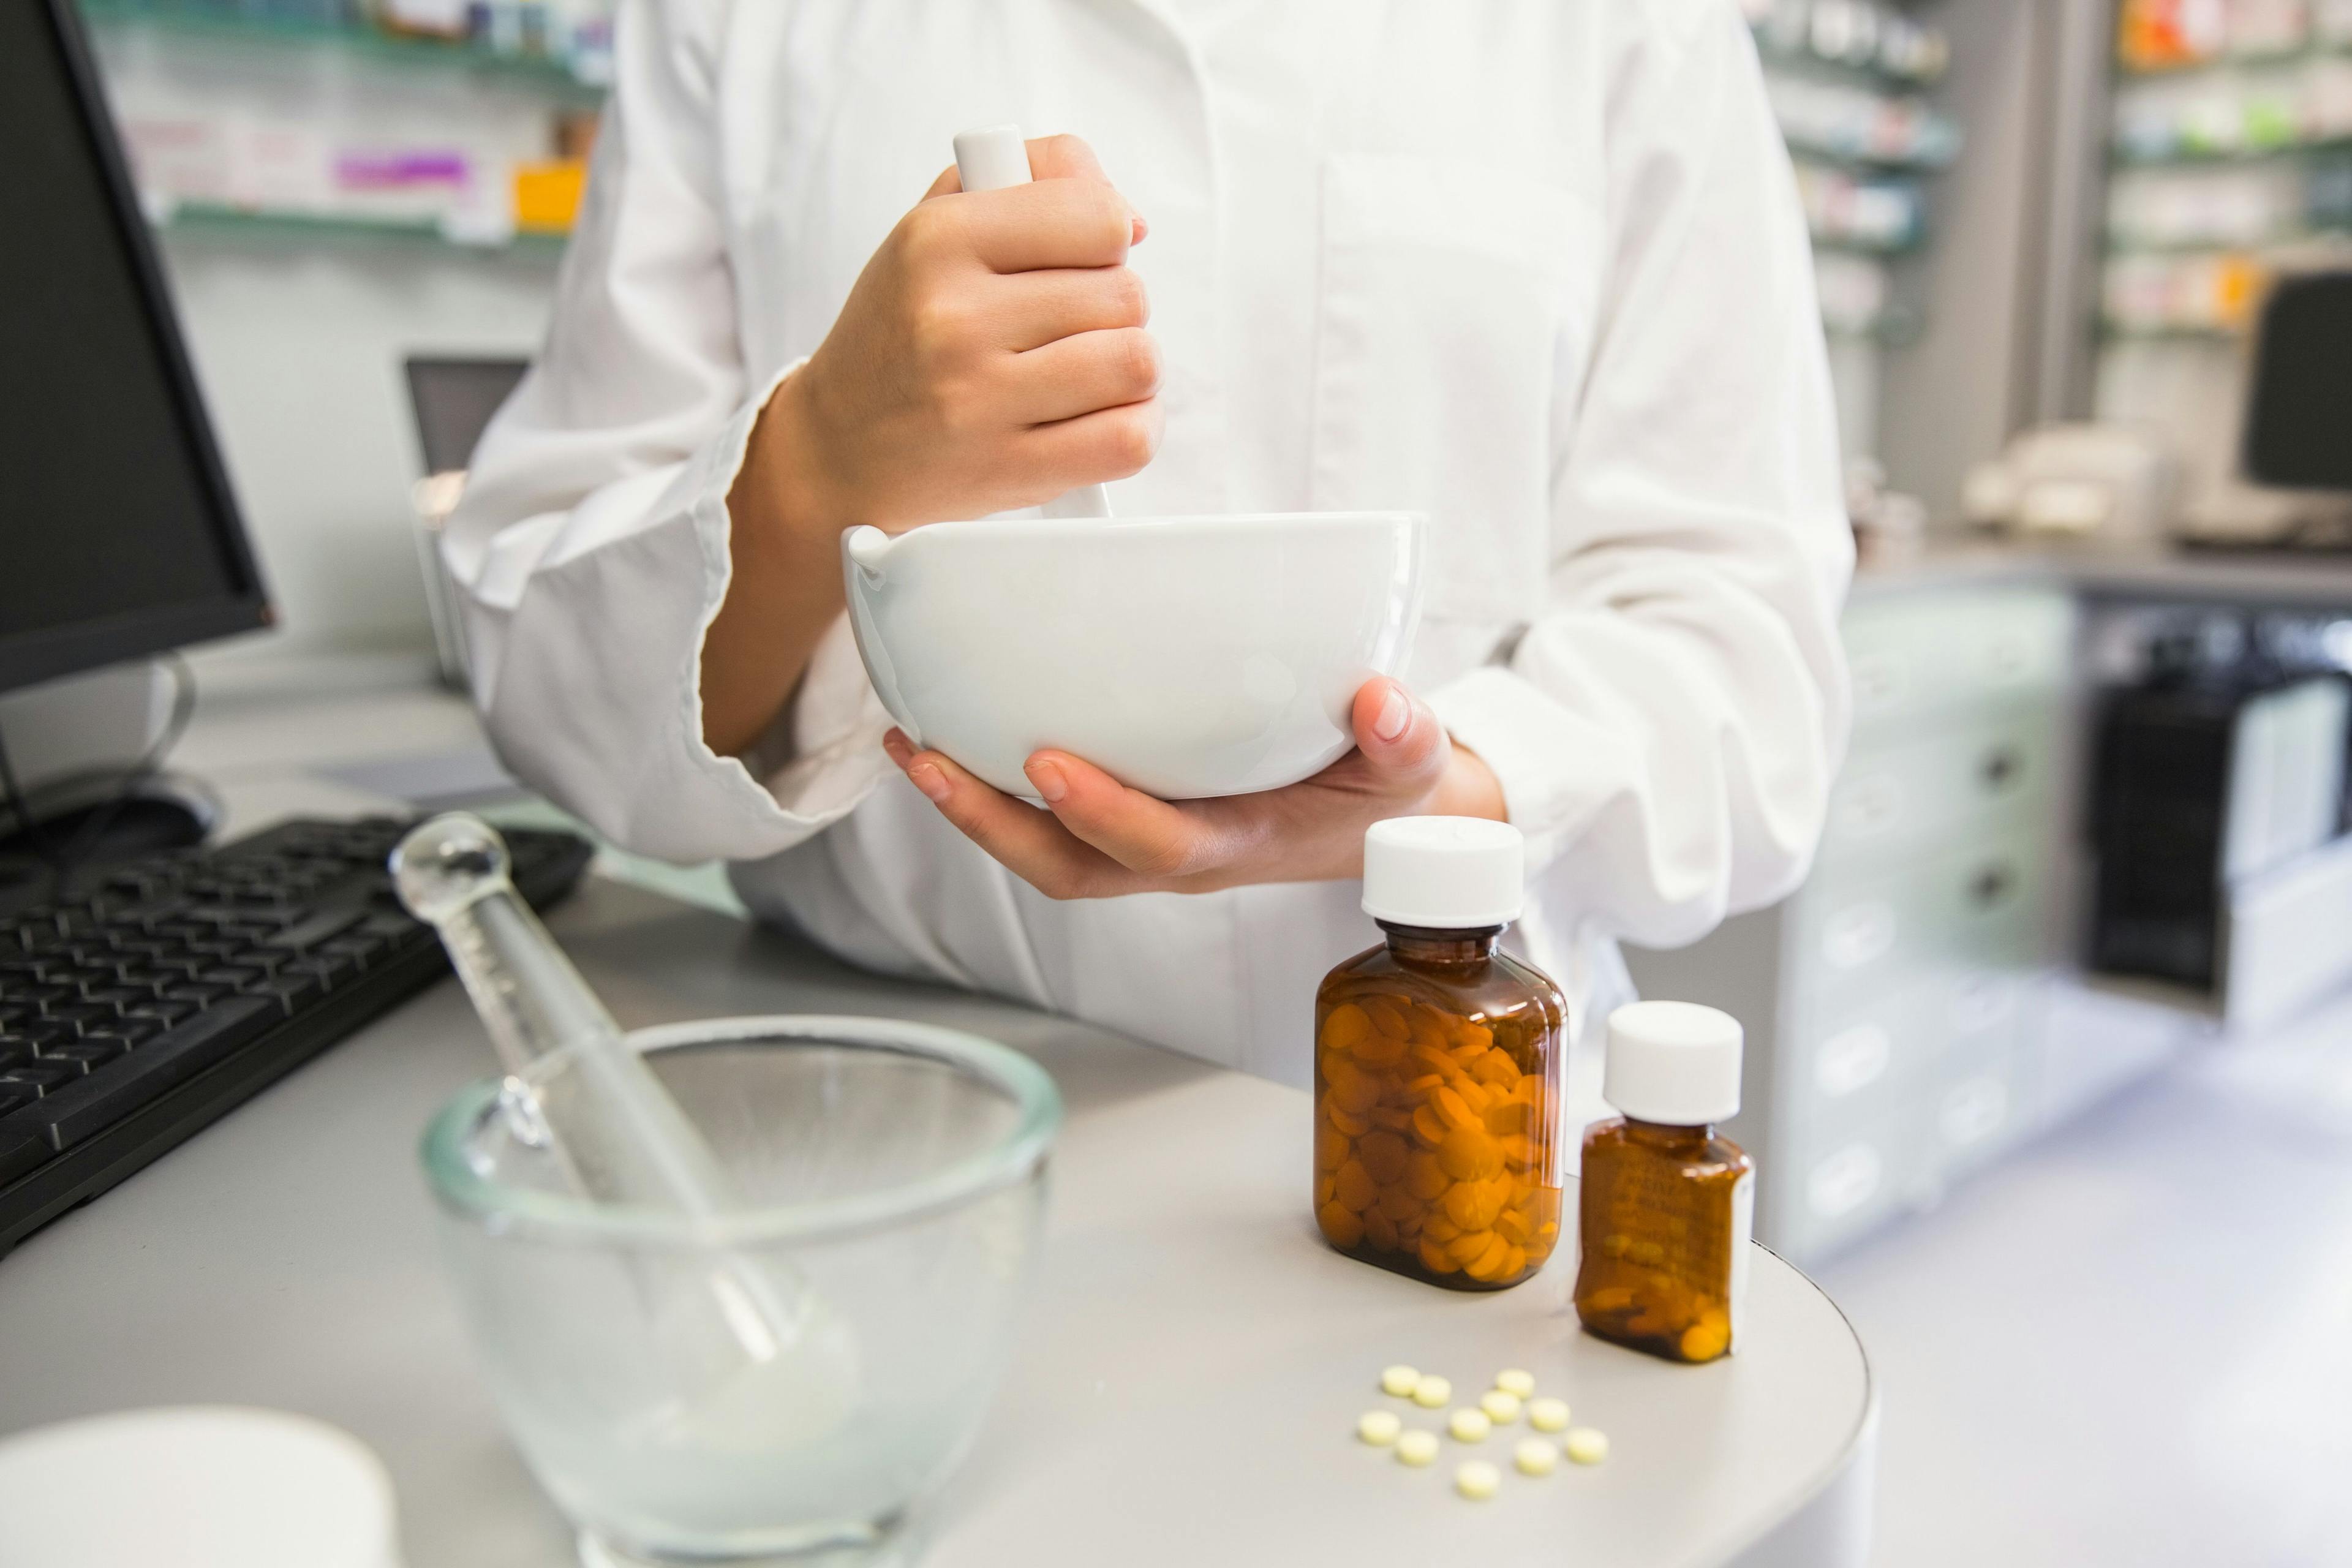 Flavoring Medications Should Be a Parent’s Choice and a Pharmacist’s Prerogative